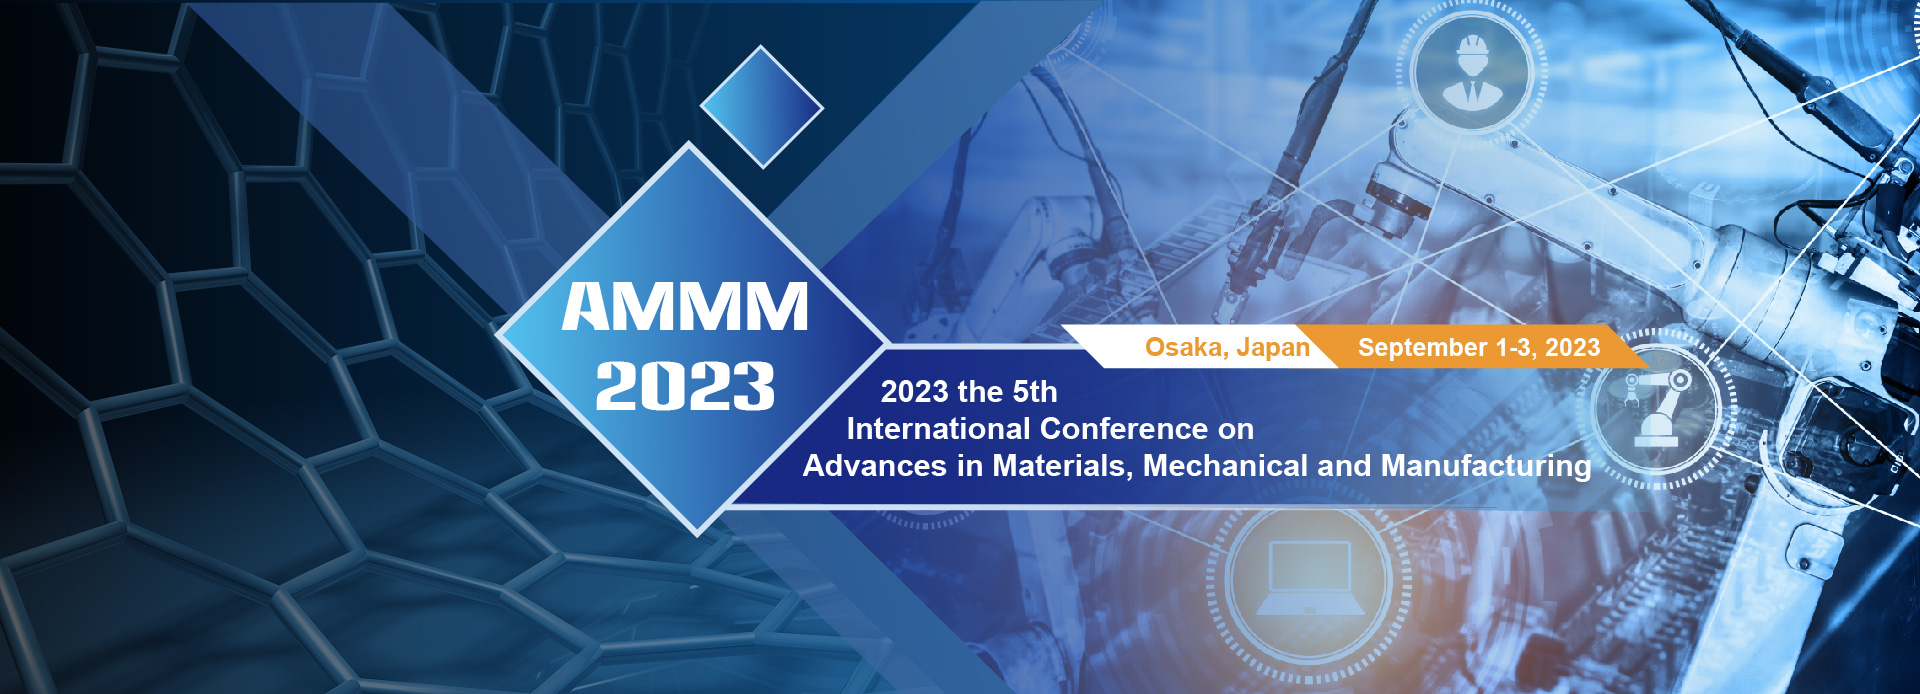 2023 5th International Conference on Advances in Materials, Mechanical and Manufacturing AMMM 2023